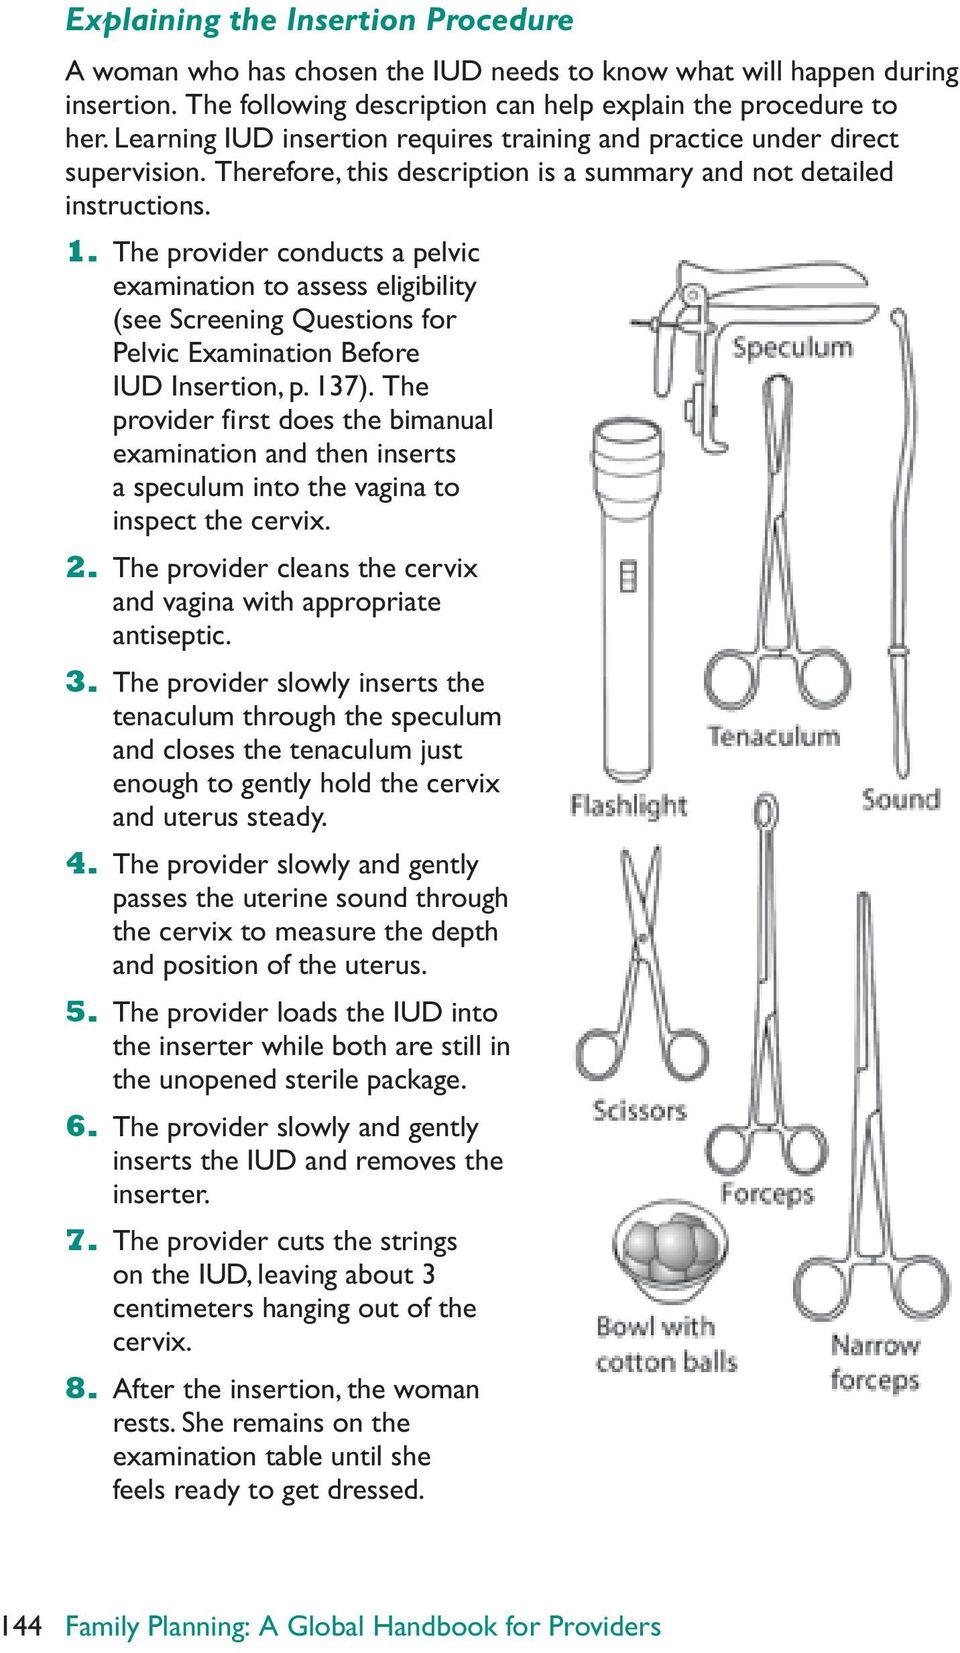 The provider conducts a pelvic examination to assess eligibility (see Screening Questions for Pelvic Examination Before IUD Insertion, p. 137).